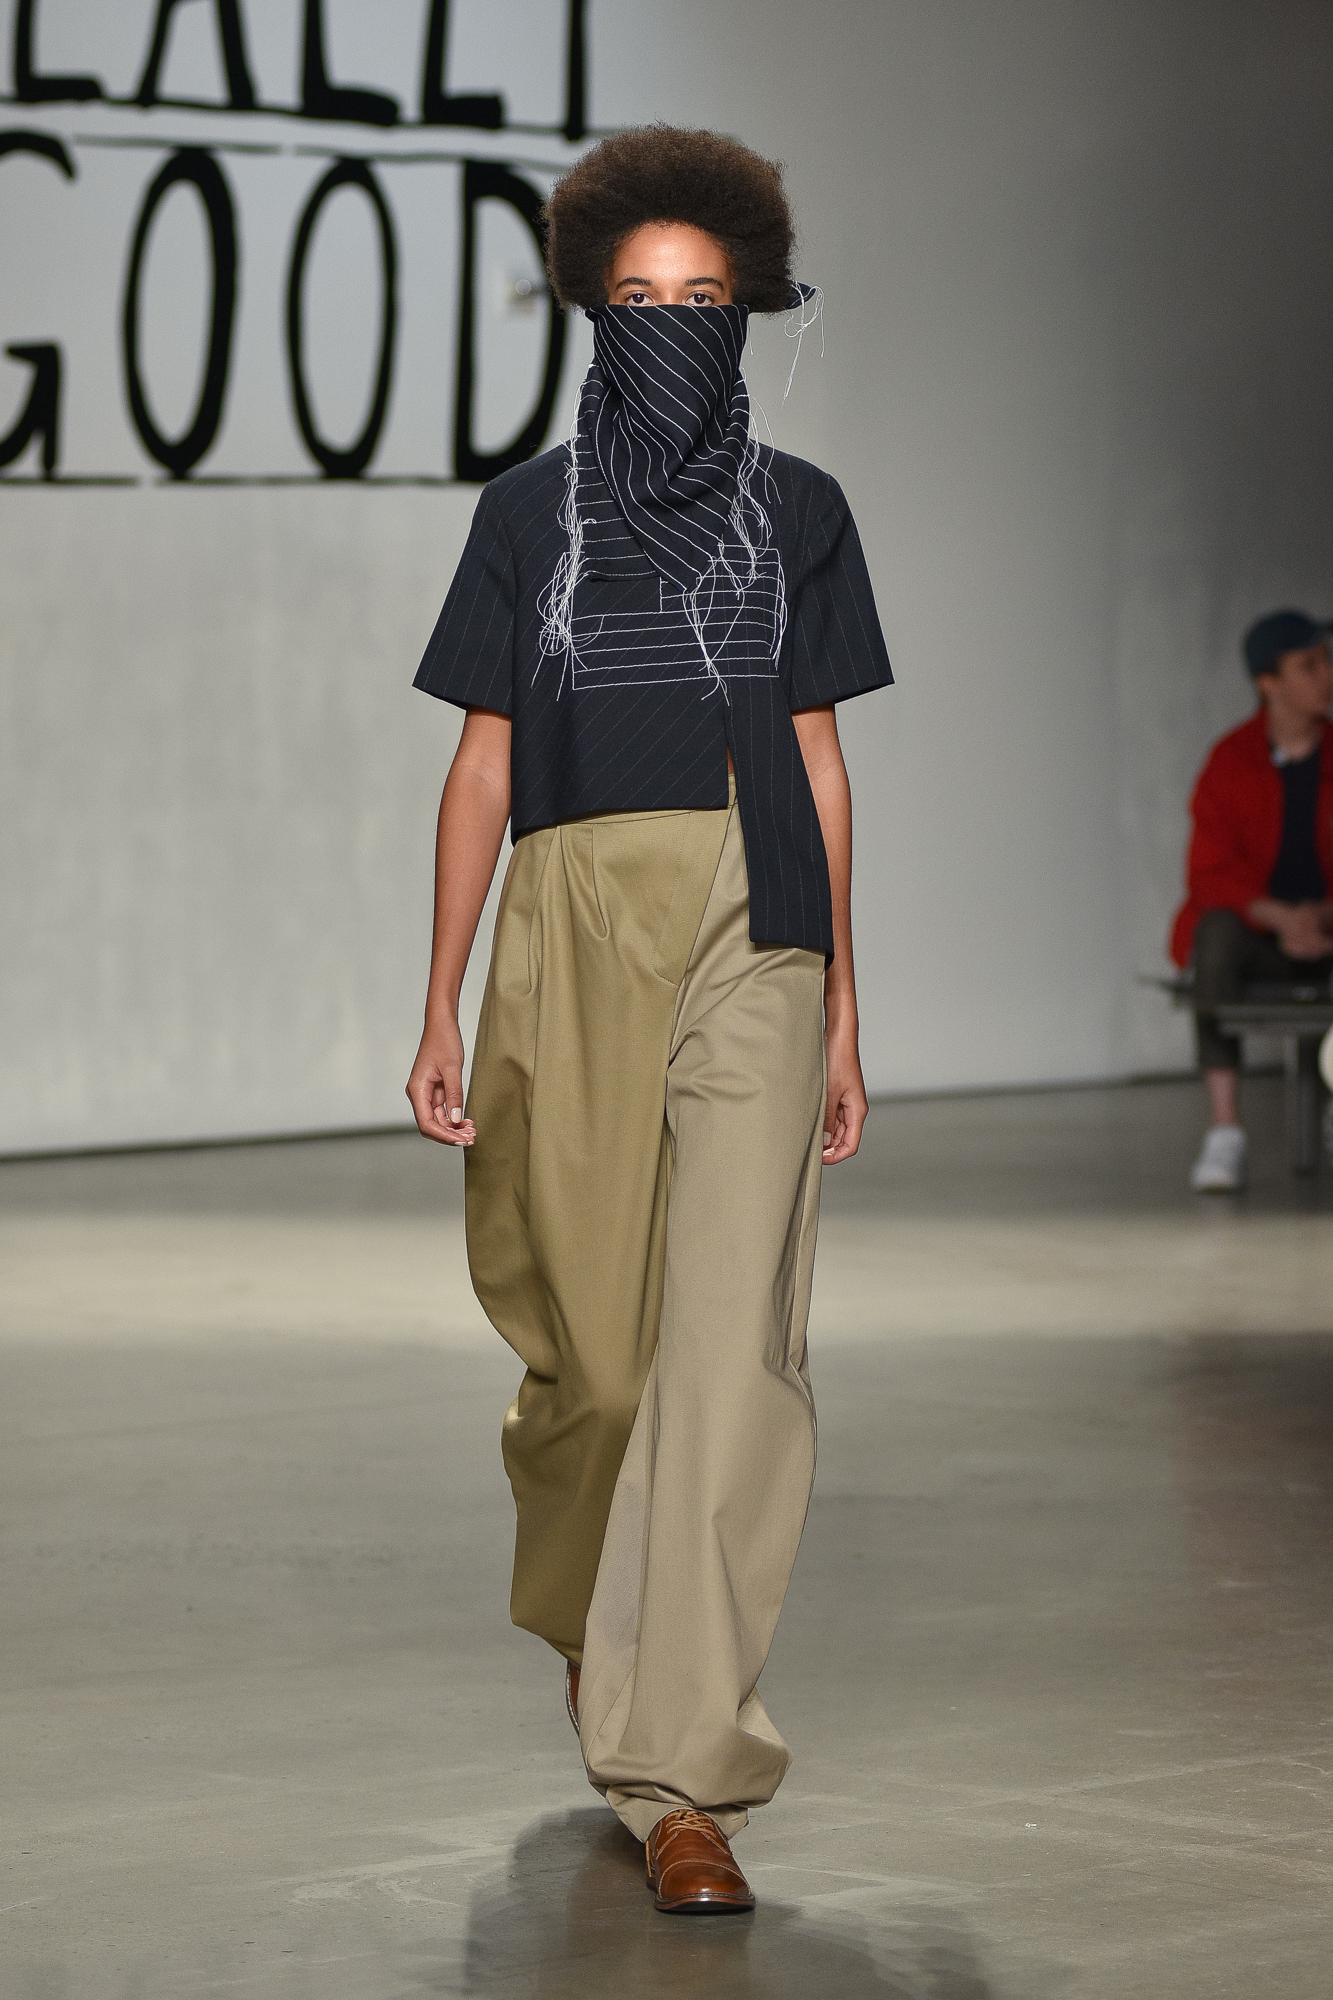 A model with a scarf covering her face walks down a runway. She is wearing a long beige trousers and a navy shirt.